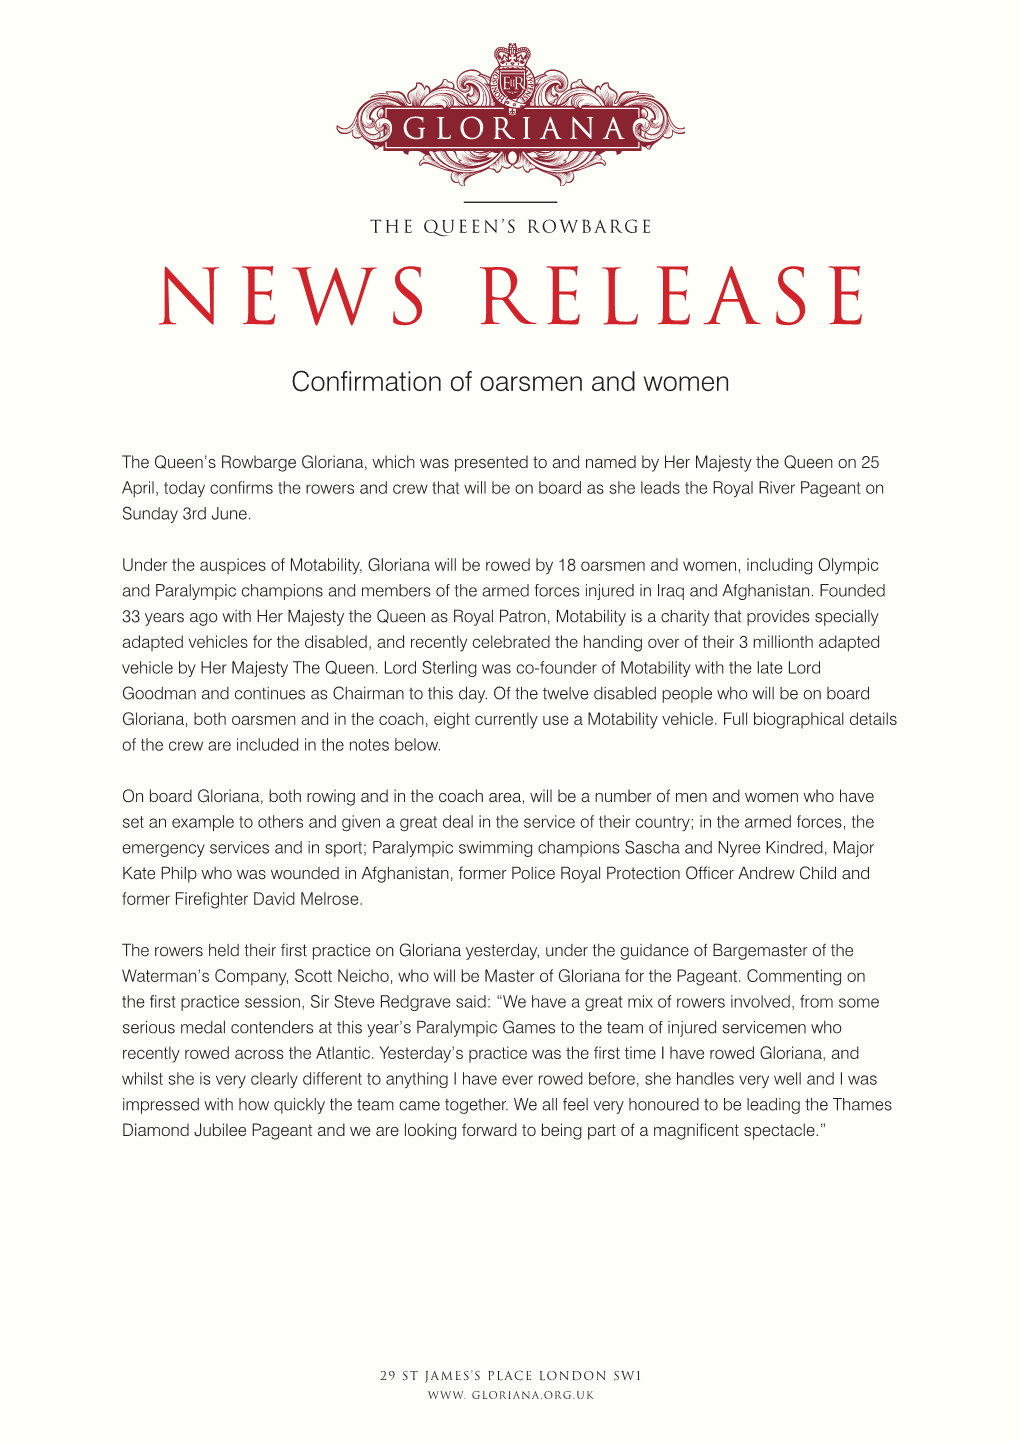 NEWS RELEASE Confirmation of Oarsmen and Women